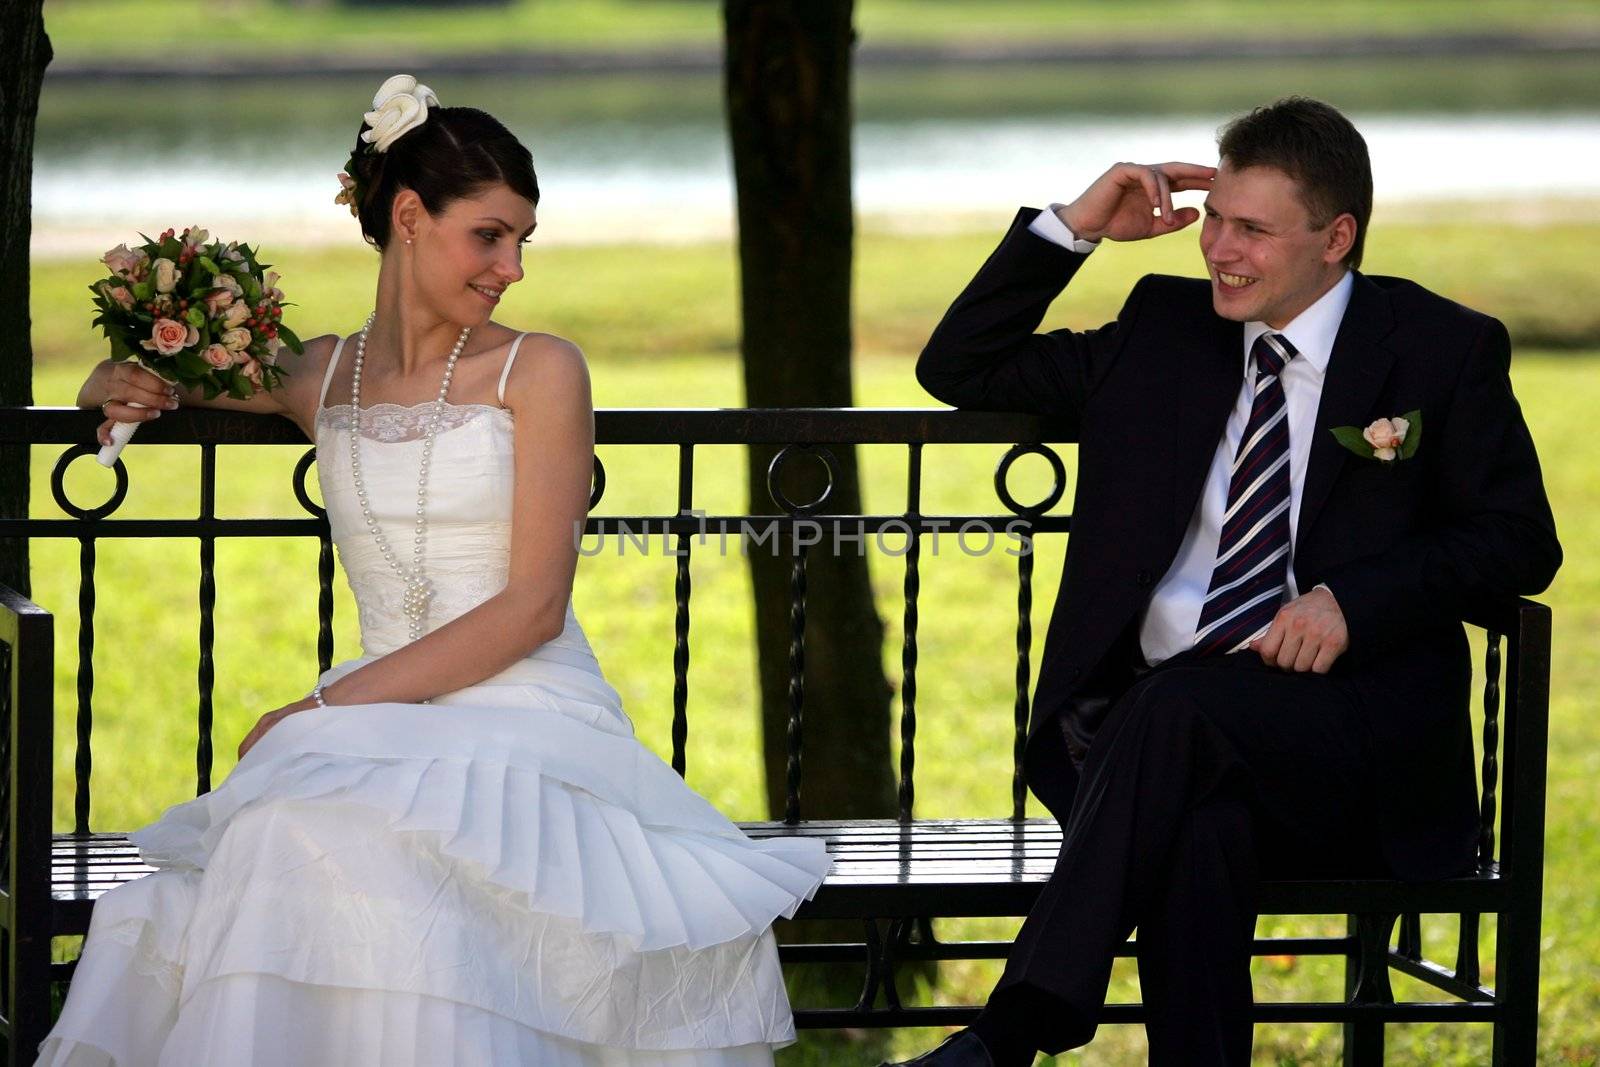 Newlywed couple sat on park bench, smiling groom and coy bride with bouquet.